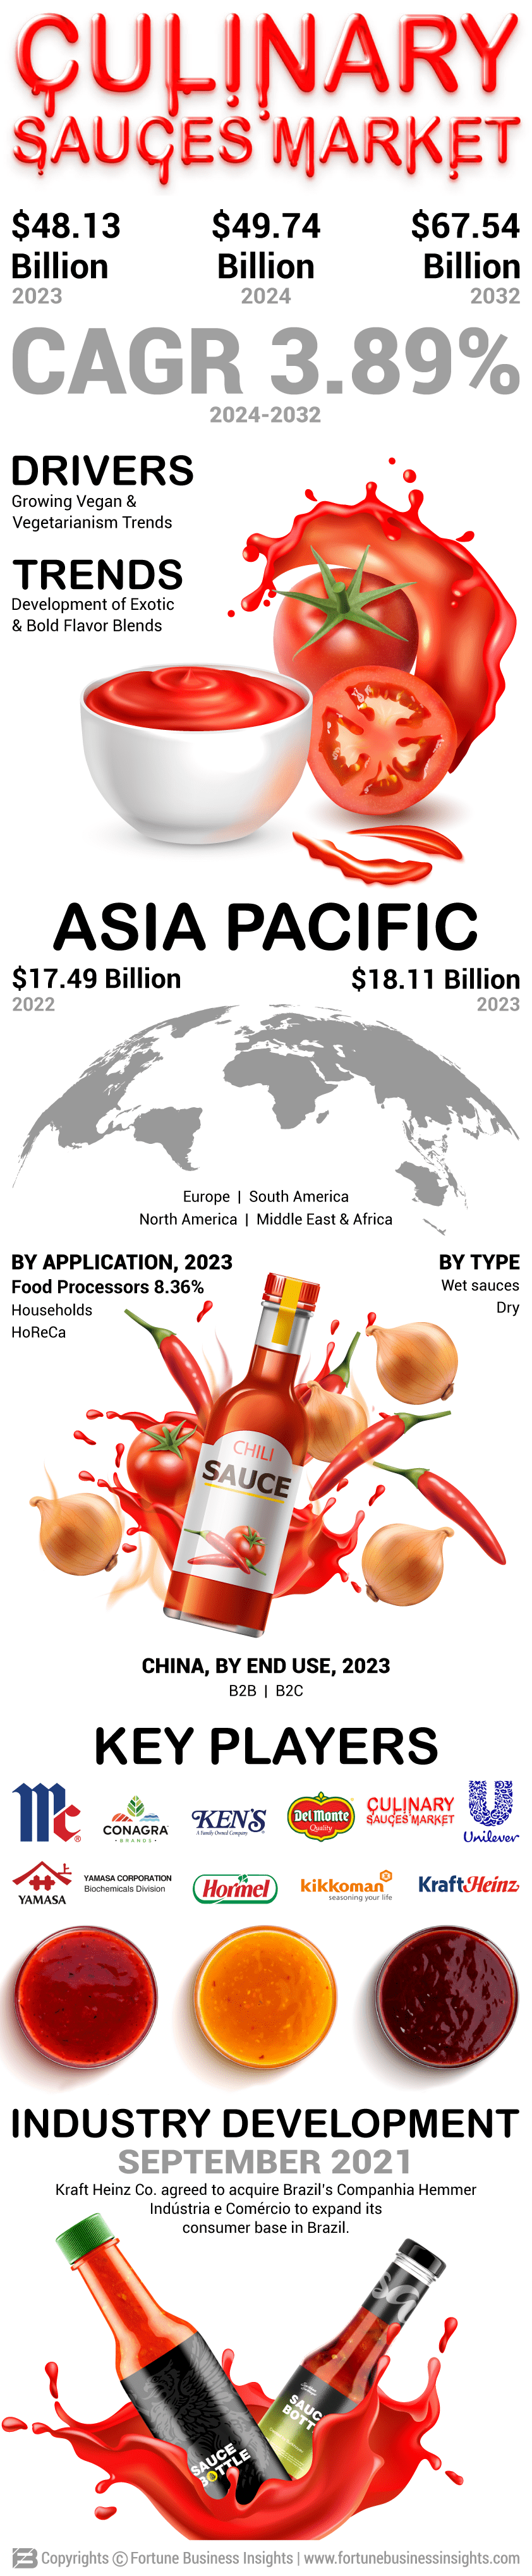 Culinary Sauces Market